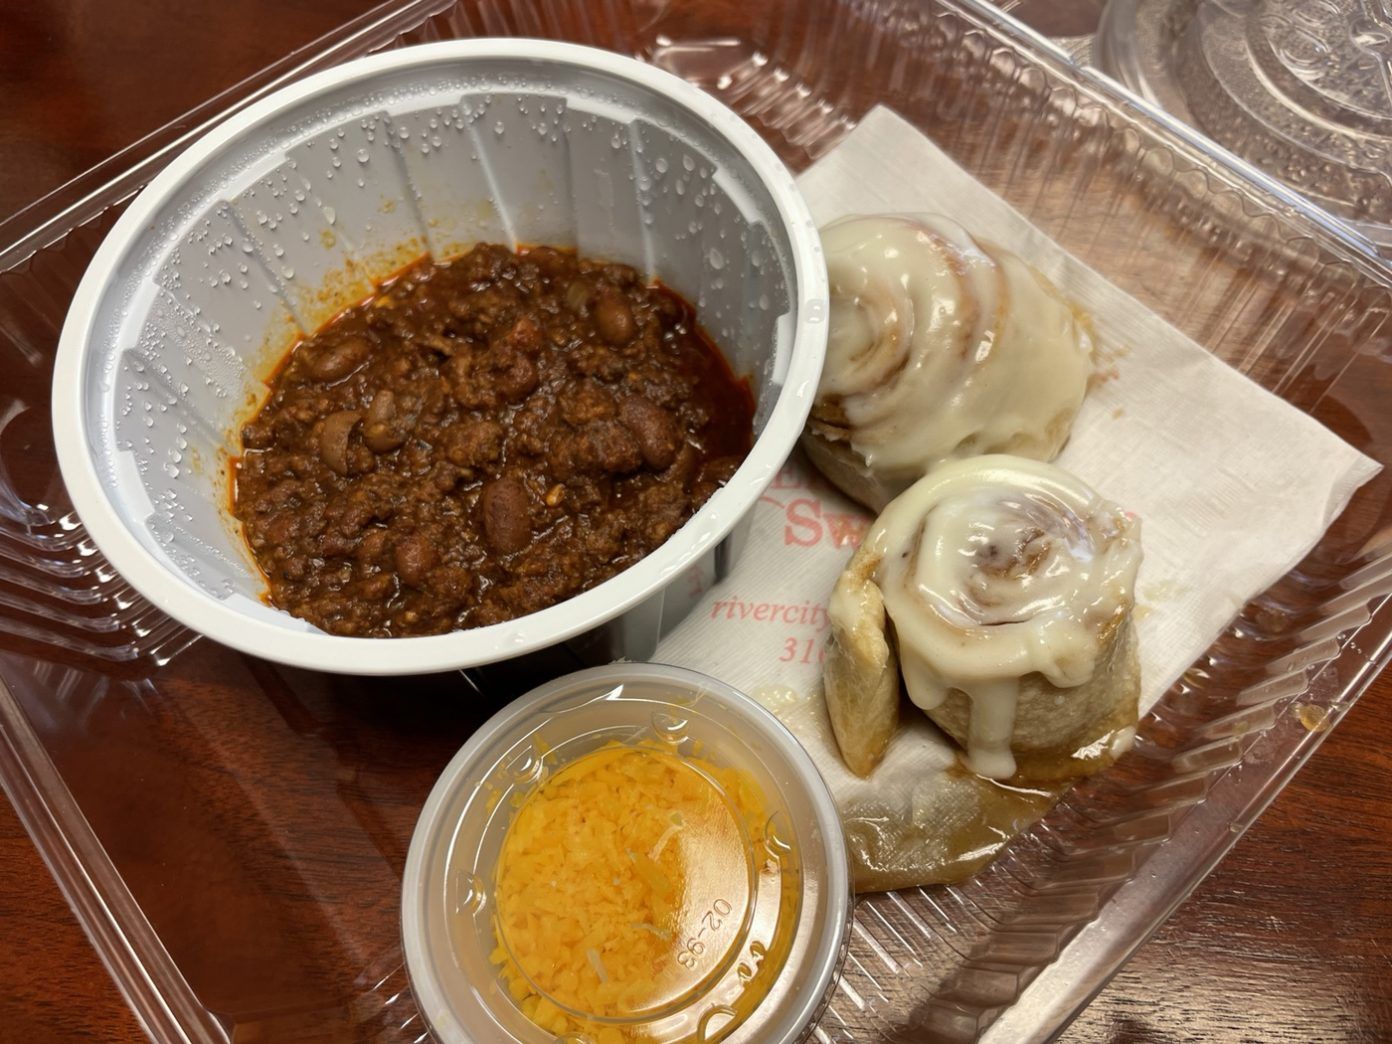 A cup of chili, two cinnamon rolls, and a cup of cheese in a to-go box